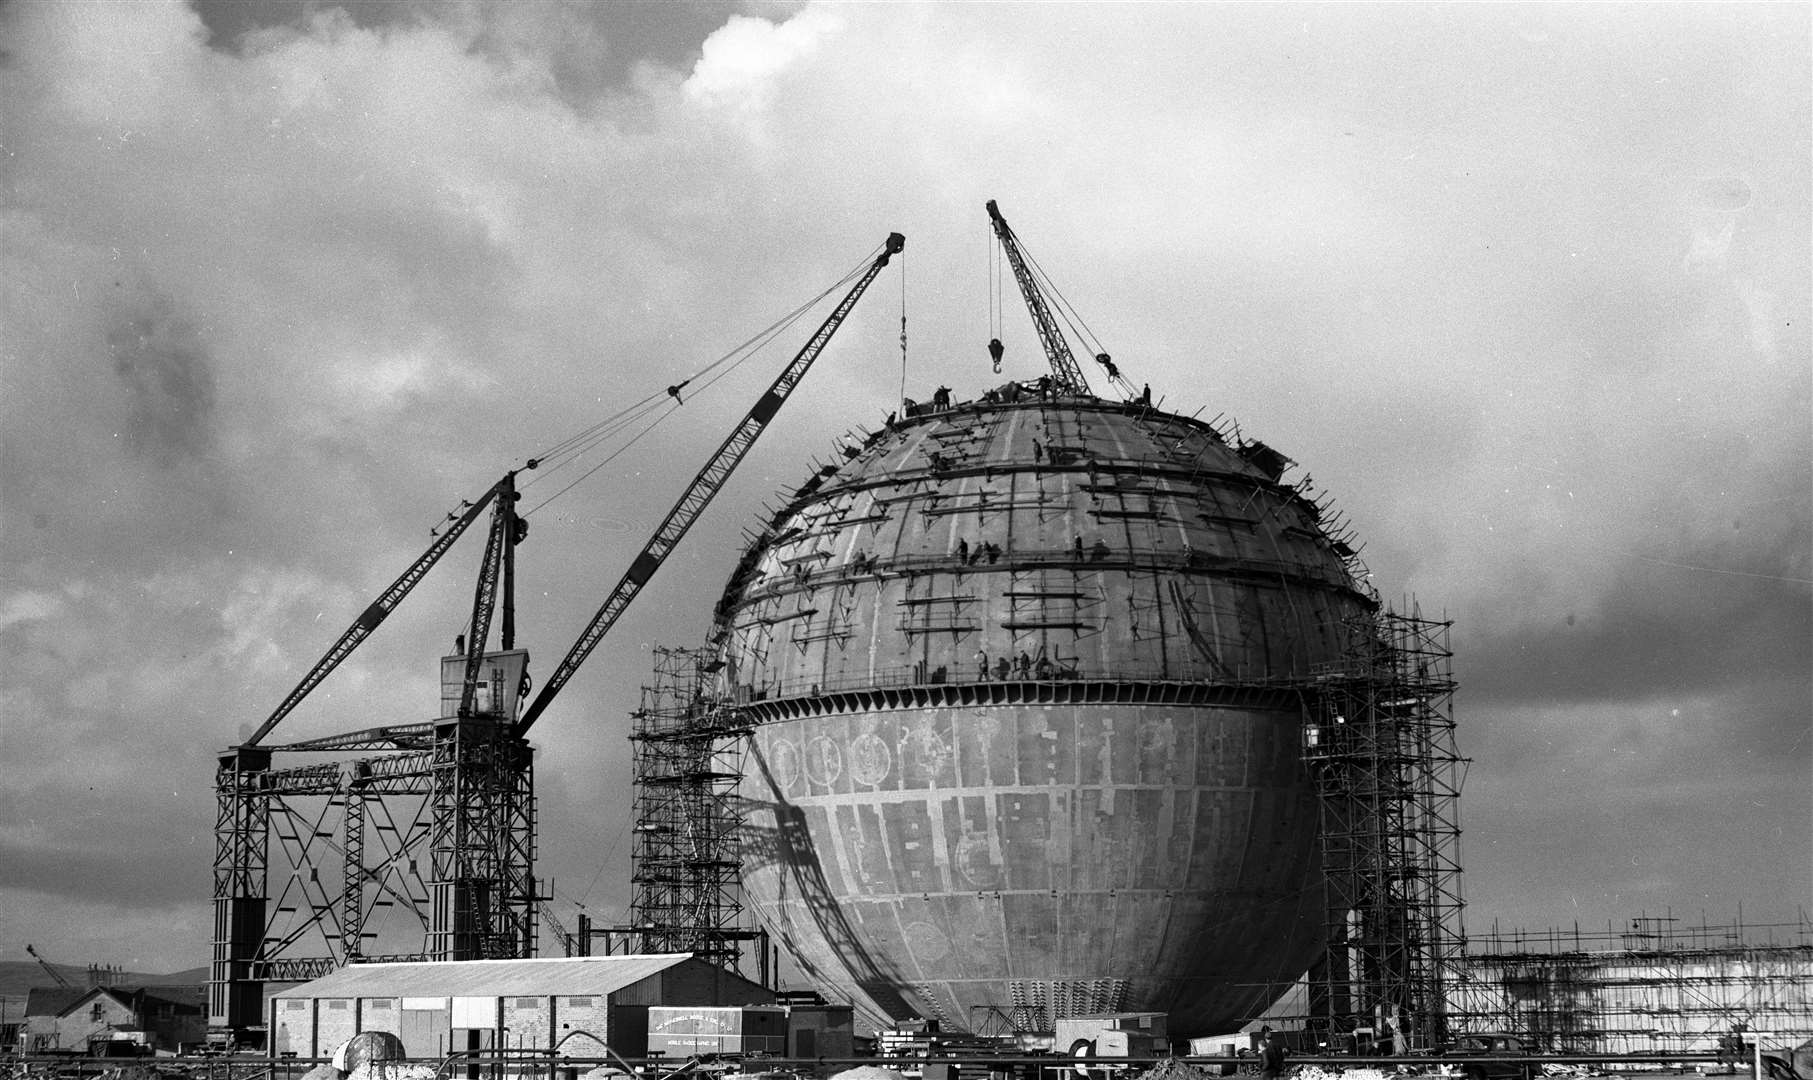 The Dounreay Fast Reactor under construction in the 1950s. Wind energy projects off the north coast could result in the biggest investment in Caithness since Dounreay and Vulcan, according to Councillor Matthew Reiss. Picture: DSRL / NDA